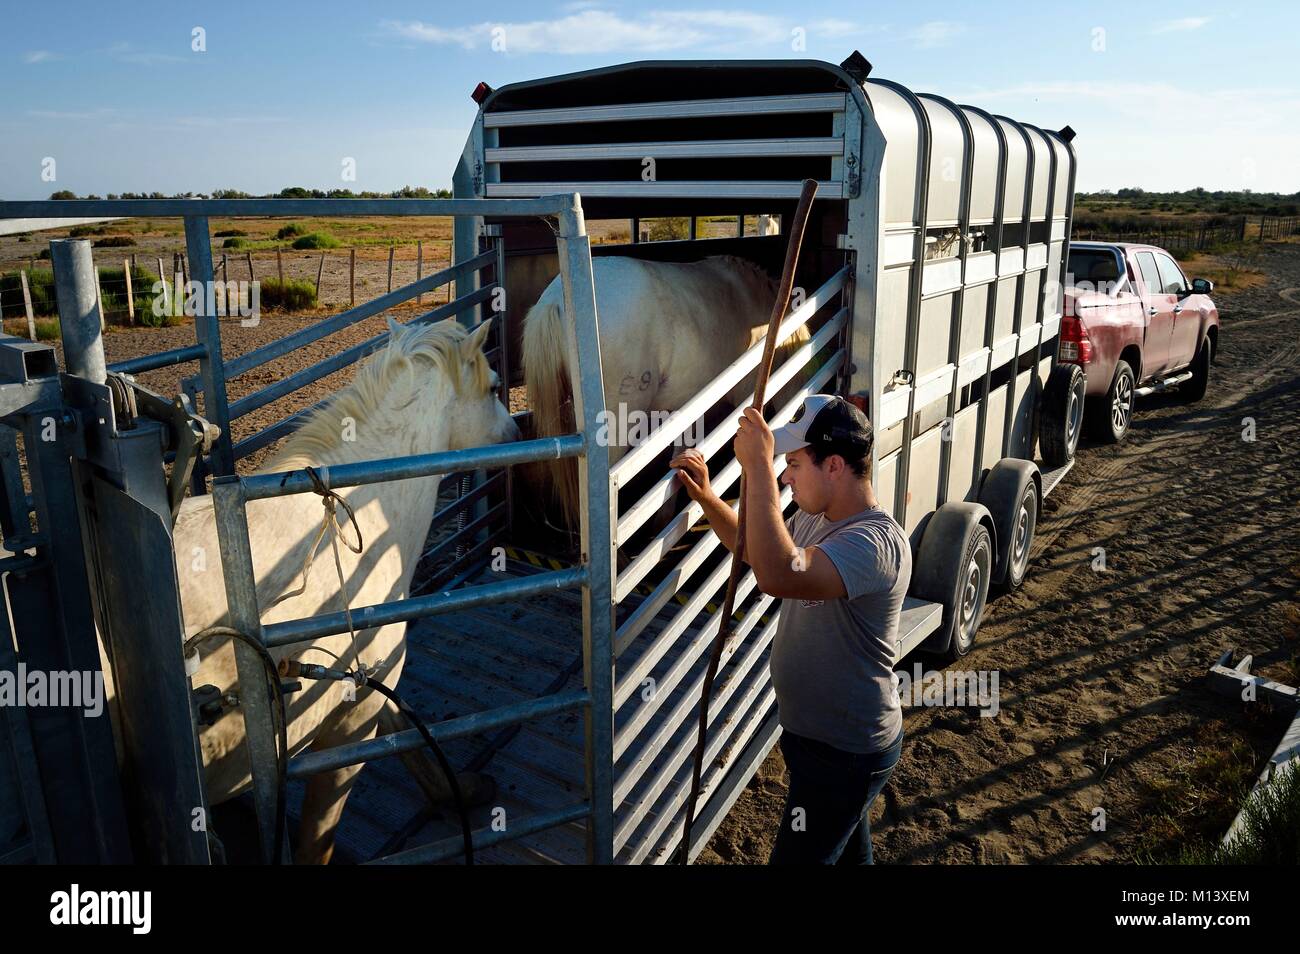 France, Bouches du Rhone, Parc naturel regional de Camargue (Regional Natural Park of Camargue), around Malagroy pond, manade Jacques Mailhan, boarding of Camargue horses in a van Stock Photo